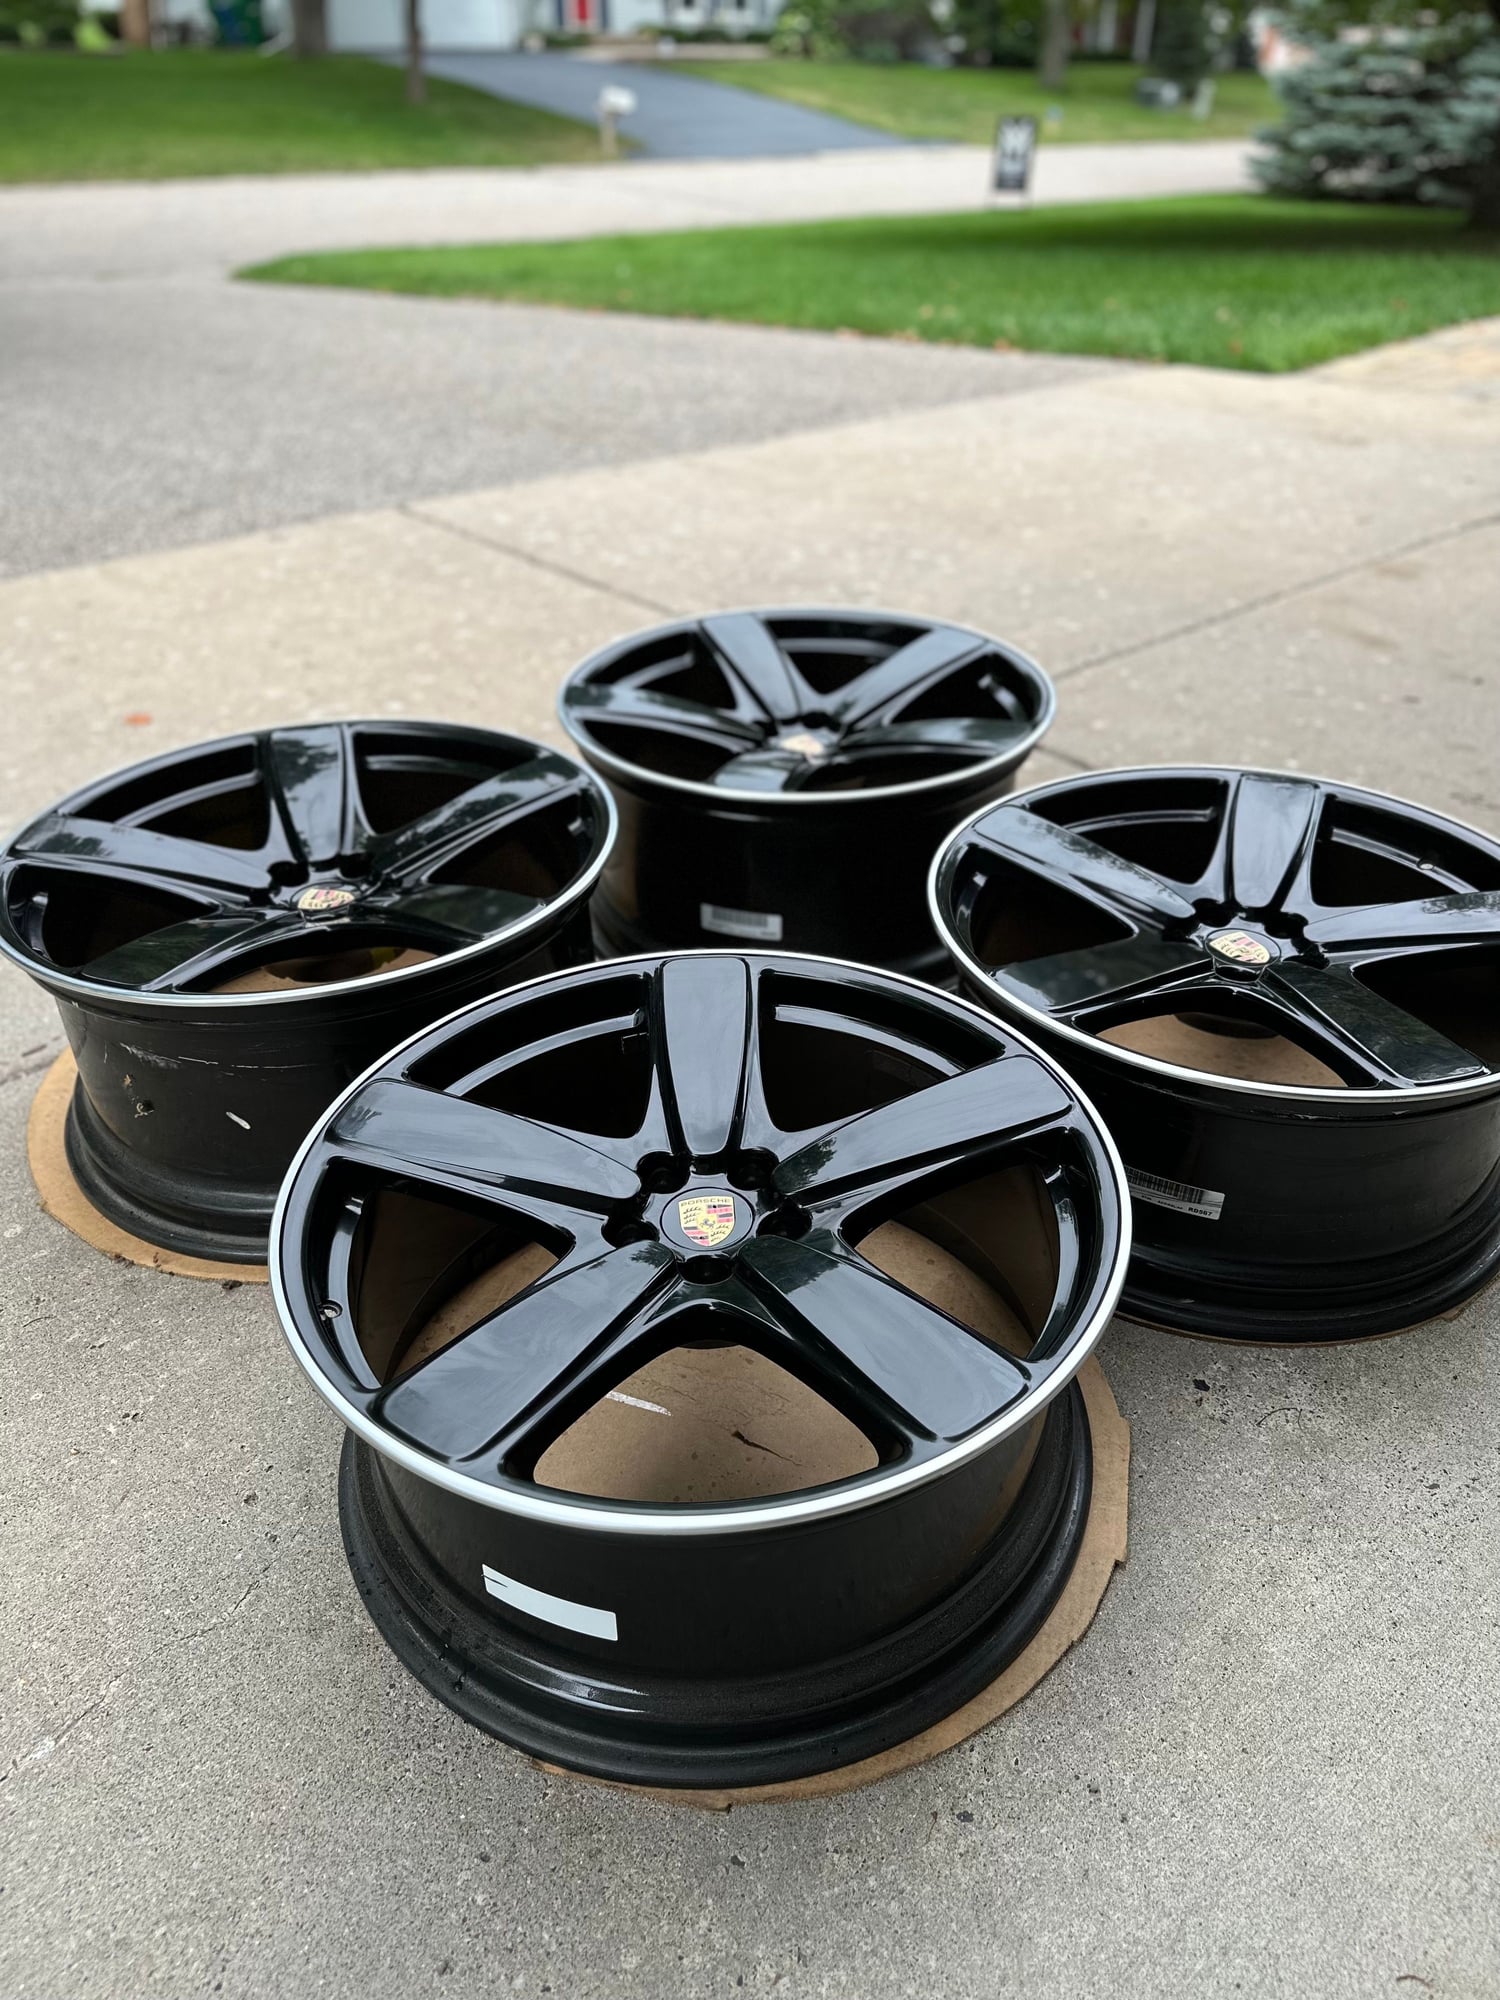 2020 Porsche Cayenne - Wheels, Tires & TPMS For Sale: Cayenne Panamera Macan 911 Carrera Boxster Cayman - Plymouth, MN 55447, United States